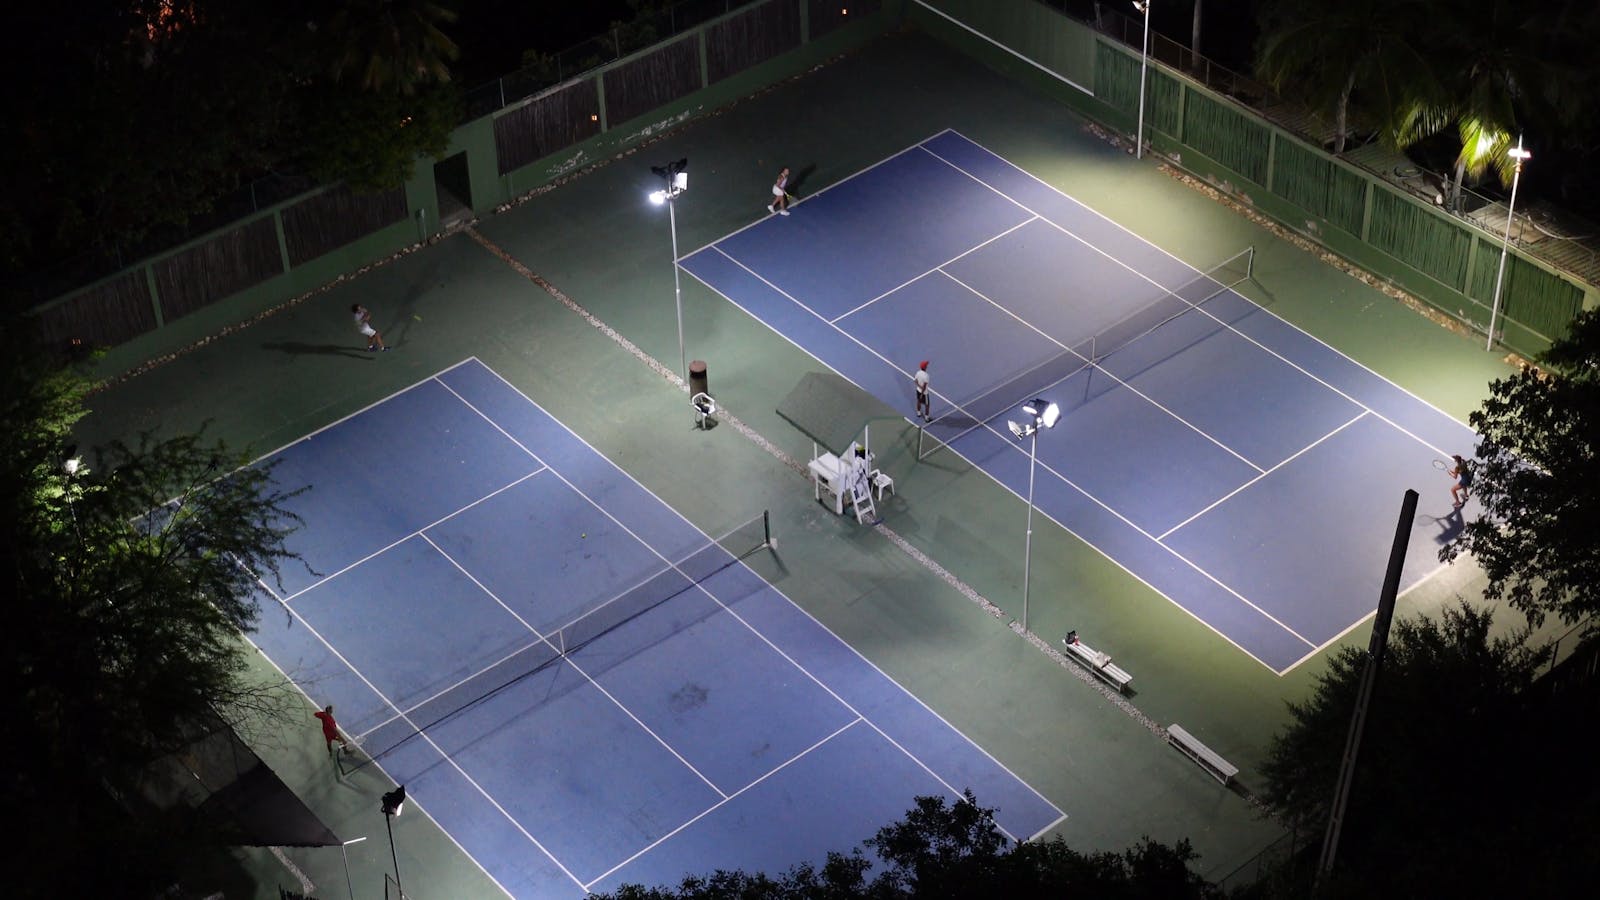 Timelapse Video of Tennis Courts Free Stock Video Footage Royalty Free